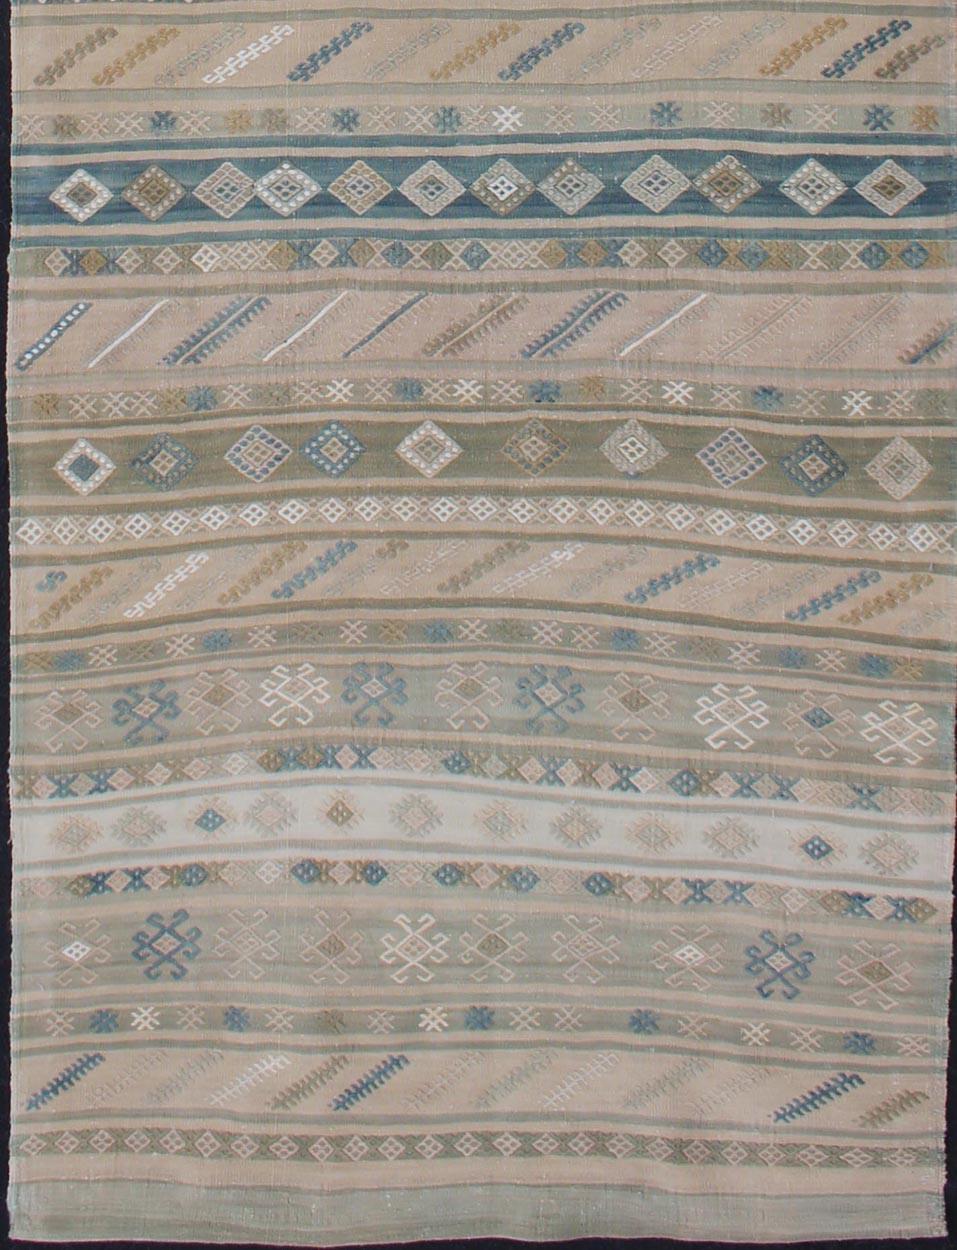 Stripe design Kilim runner with geometric motifs, rug en-176922, country of origin / type: Turkey / Kilim, circa 1950

This flat-woven Kilim runner from Turkey features an exciting composition consisting of stripes rendered in natural tones. The